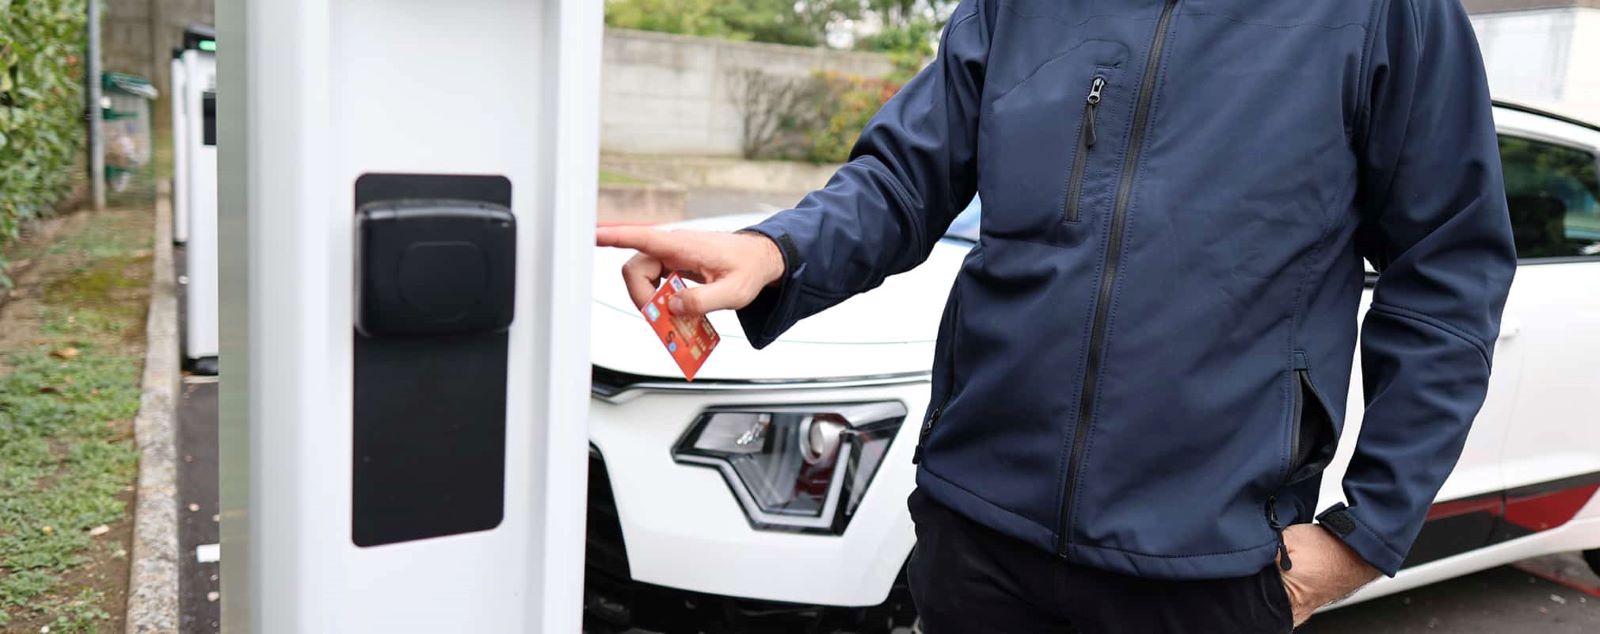 The payment devices introduced on new EV chargers use a cloud-based system.